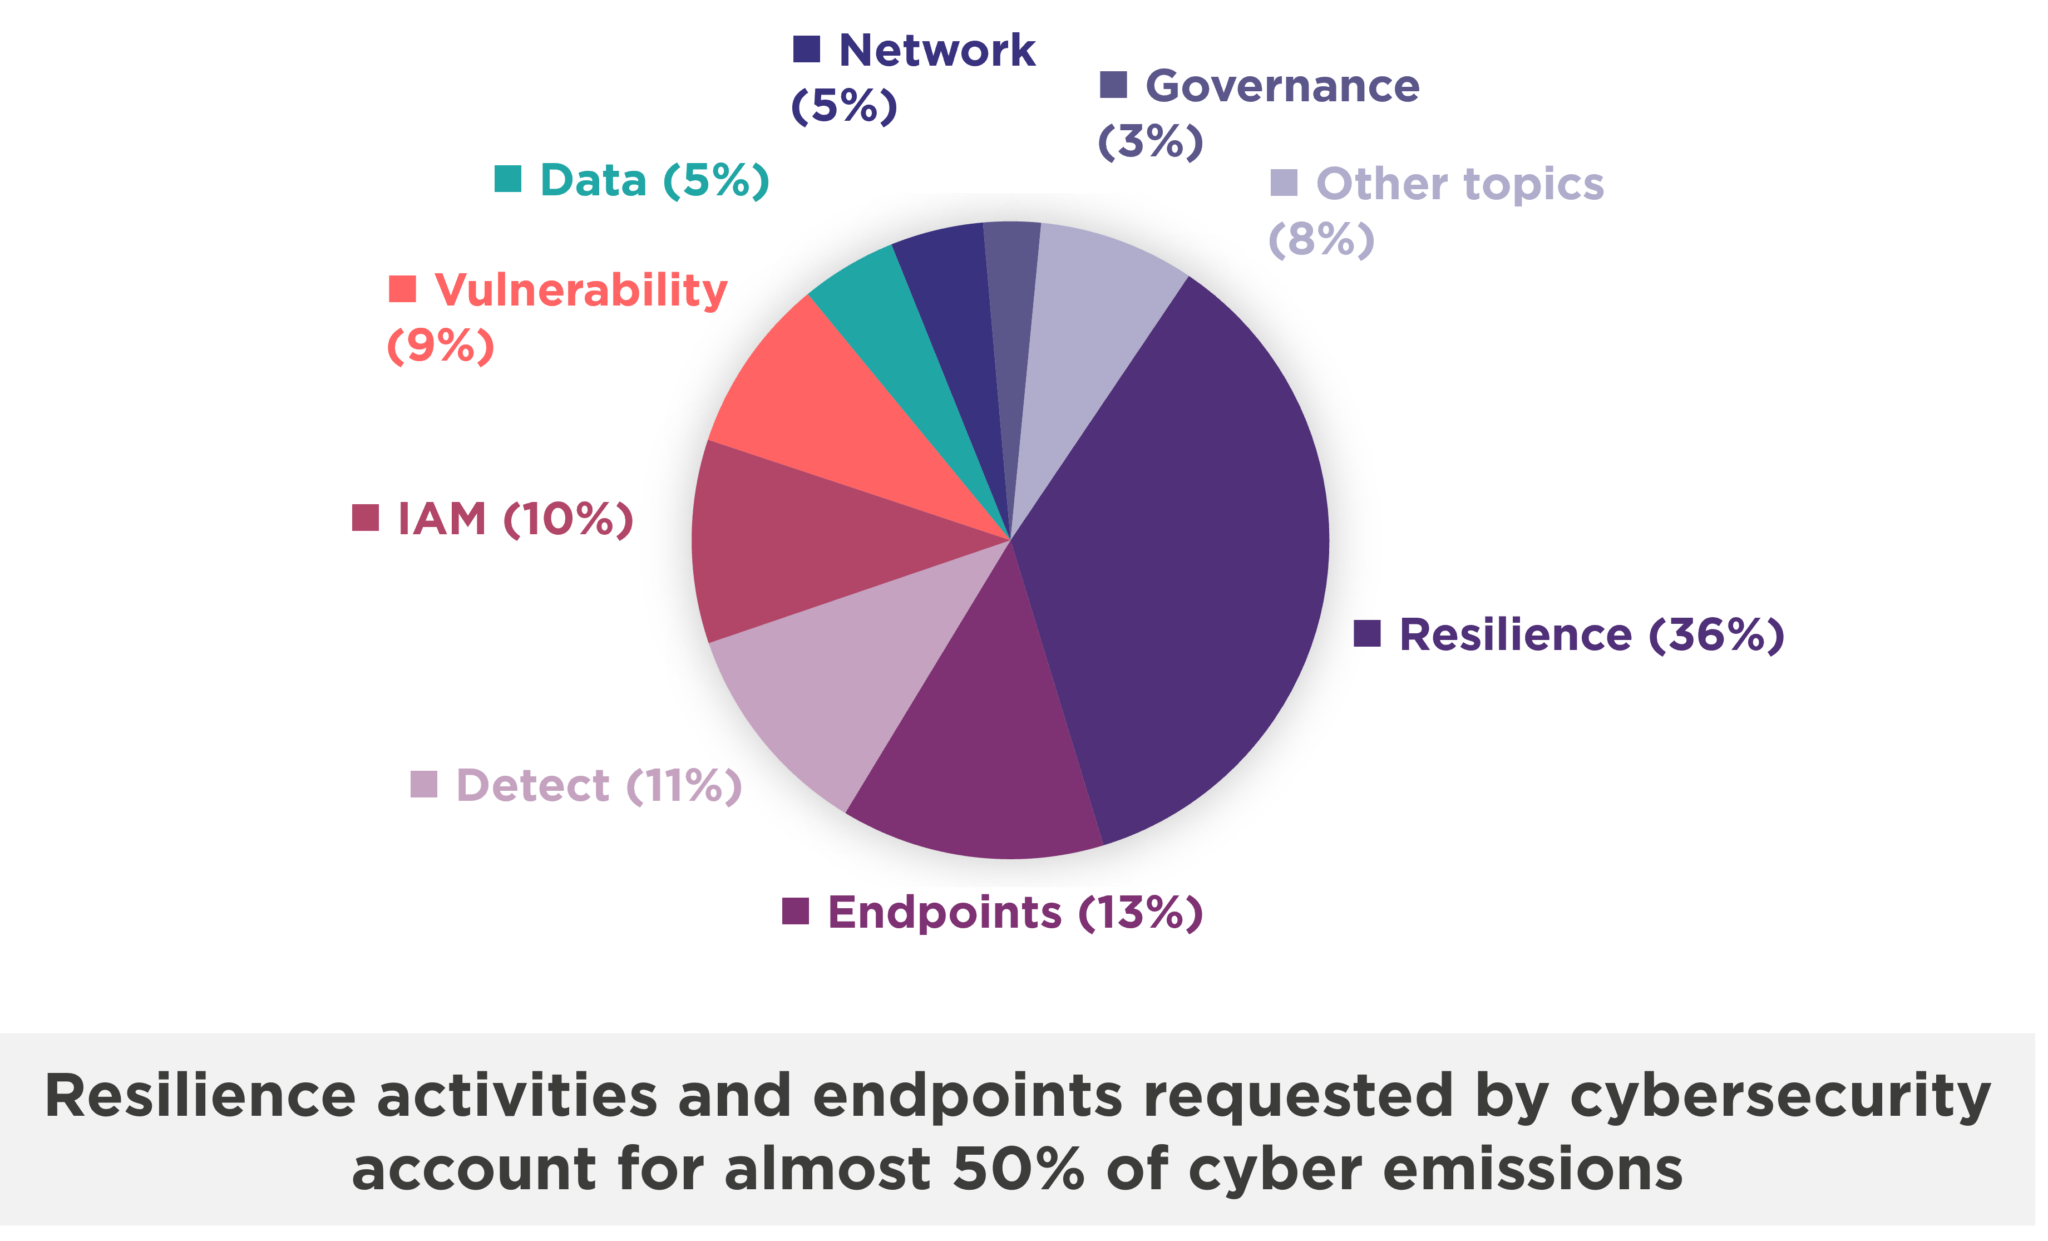 Resilience activities and endpoints requested by cybersecurity account for almost 50% of cyber emissions